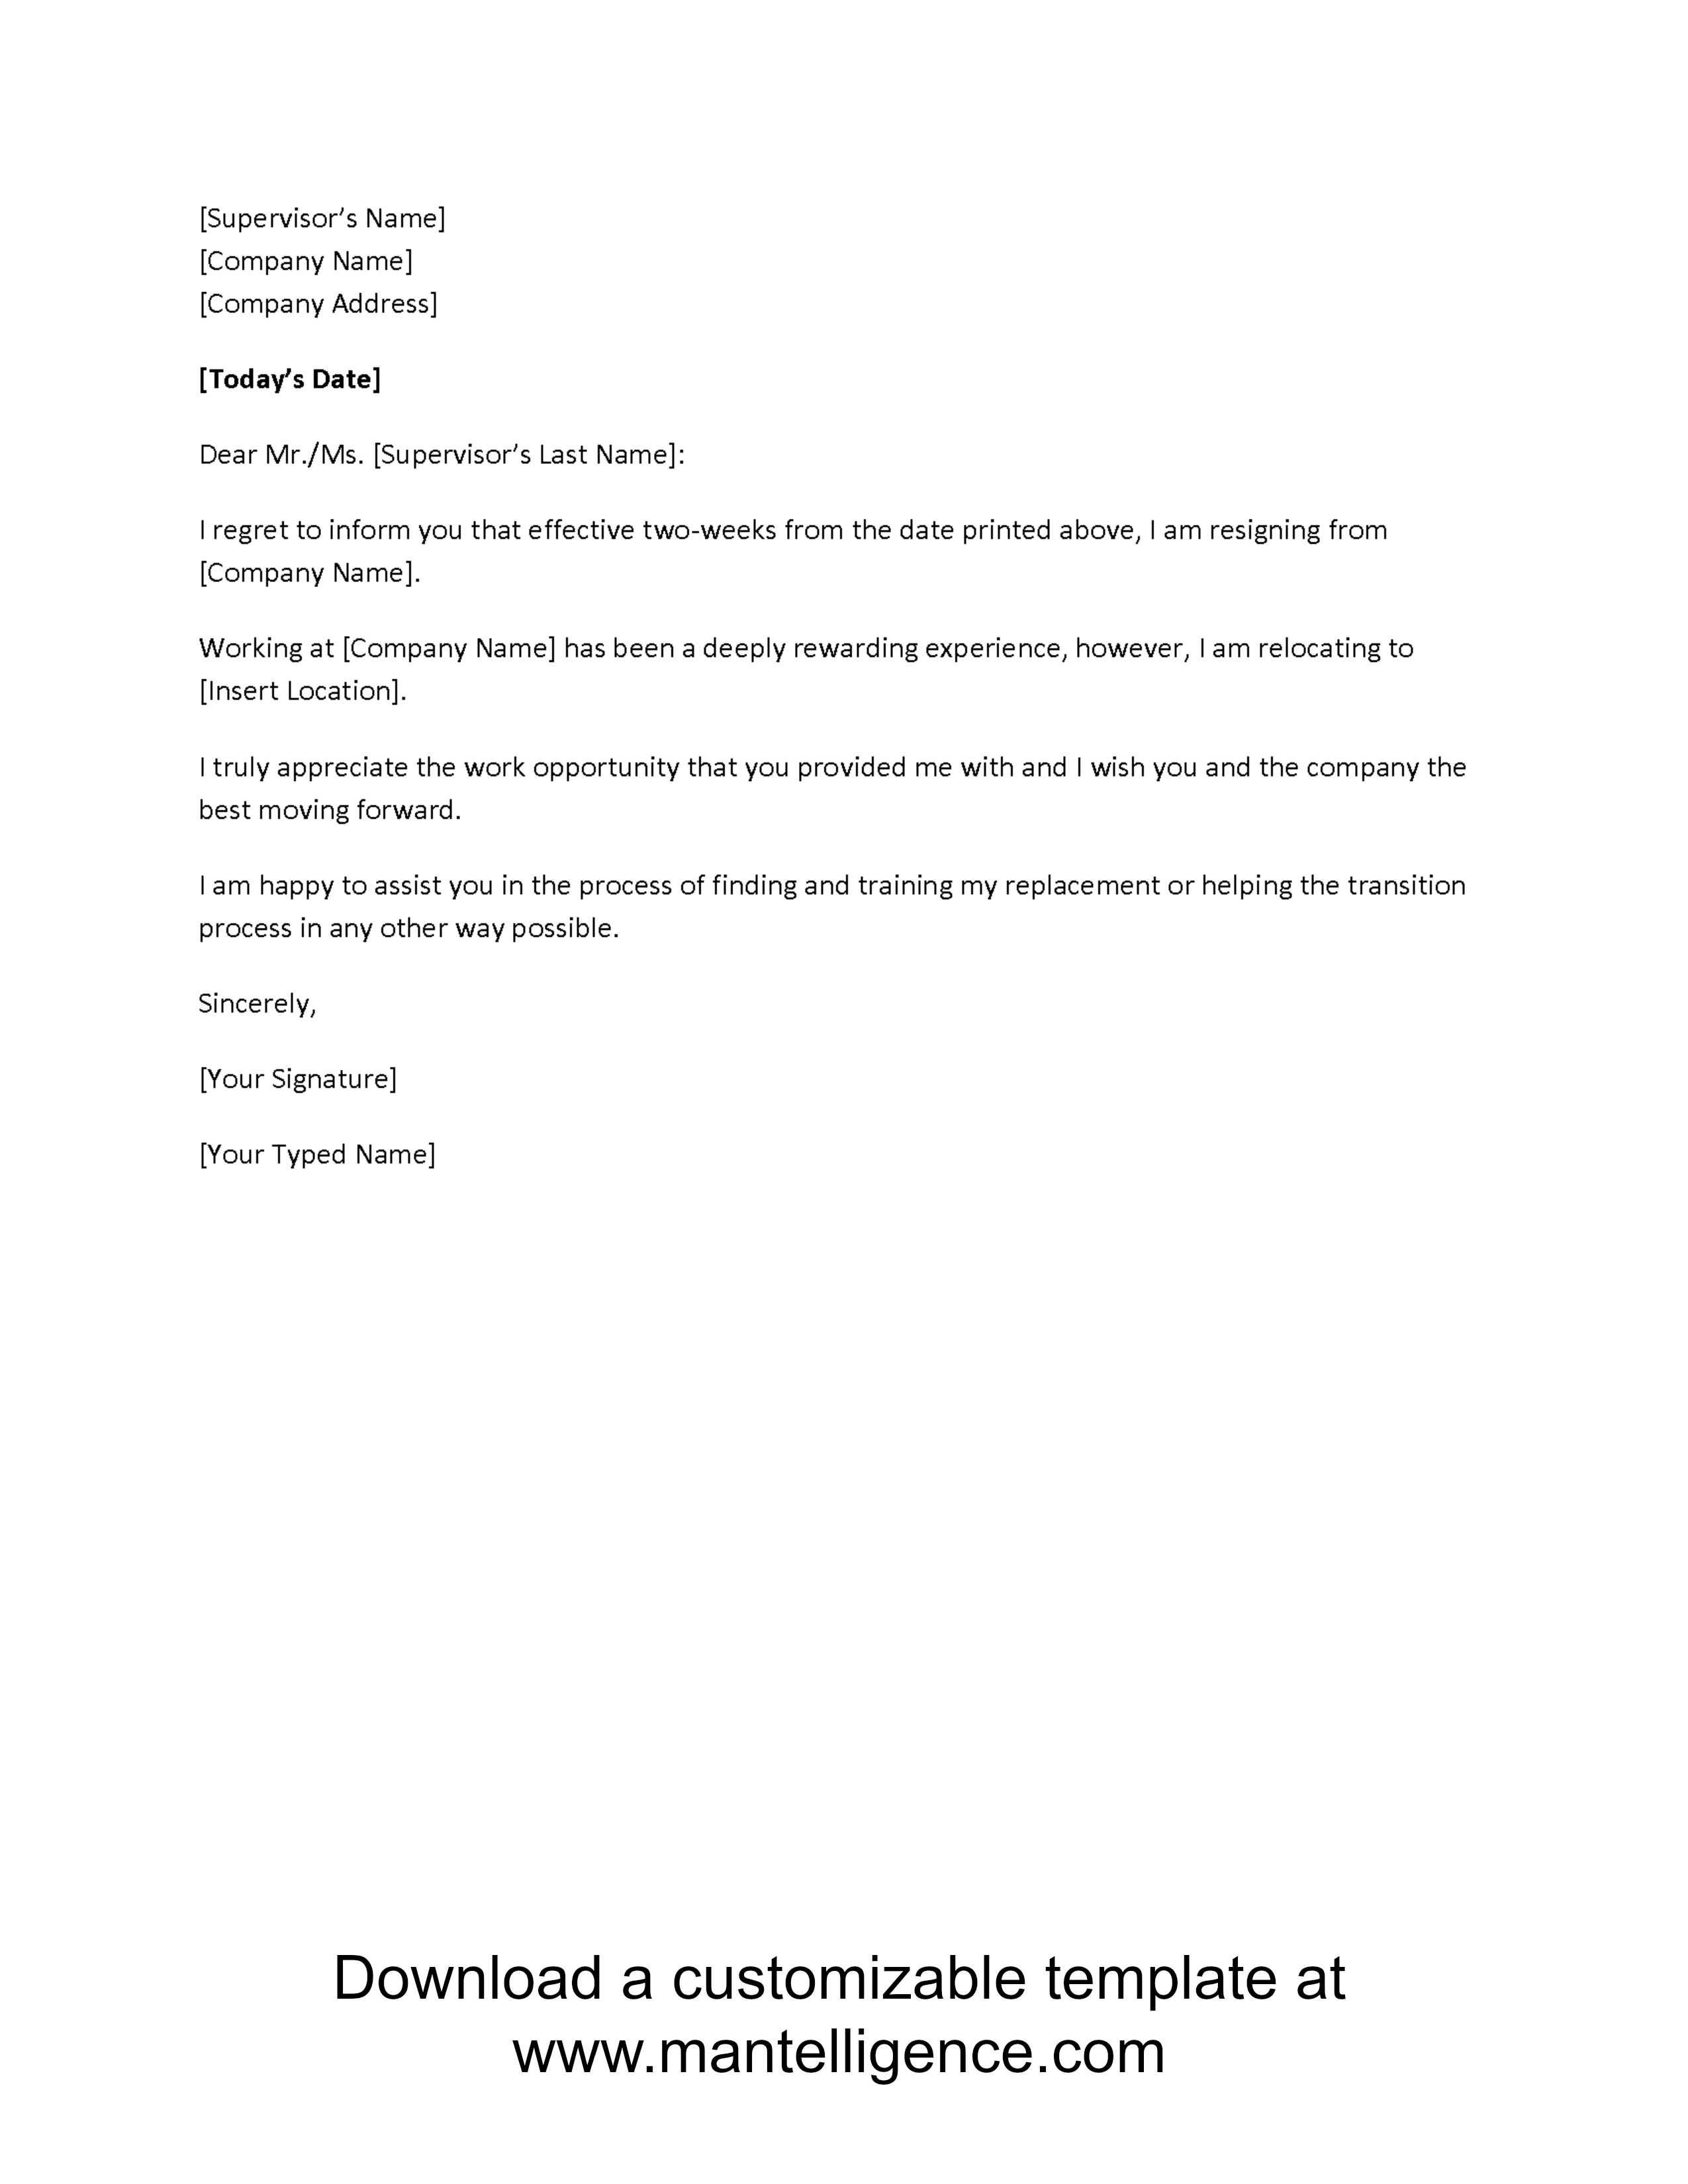 Vote Of No Confidence Letter Template - 3 Highly Professional Two Weeks Notice Letter Templates